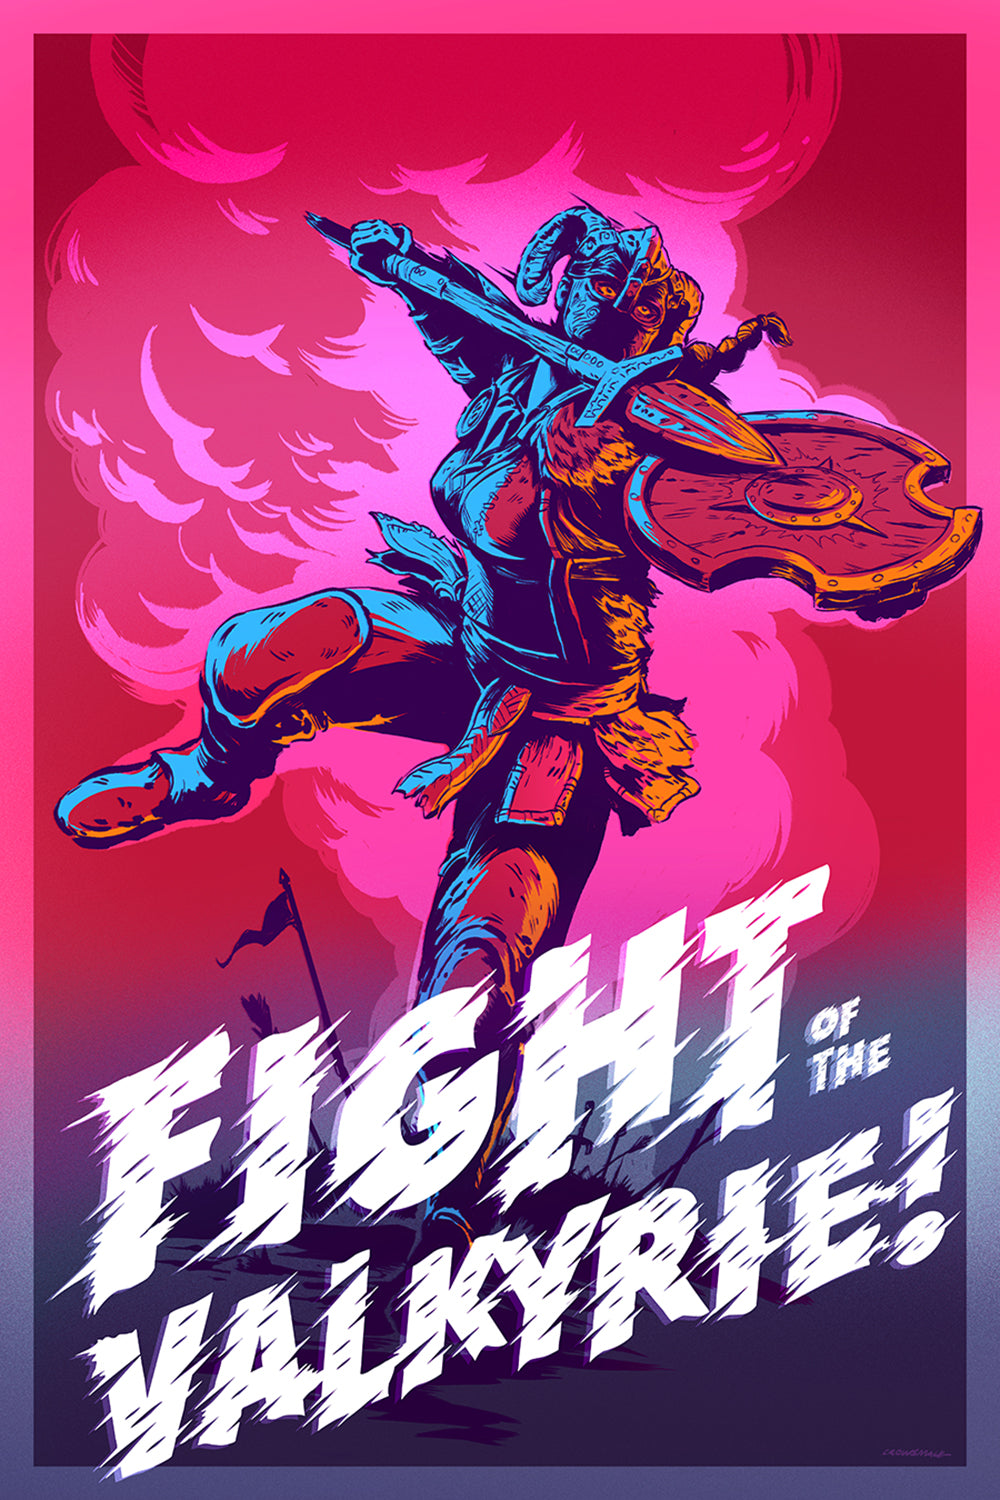 Fight of the Valkyrie